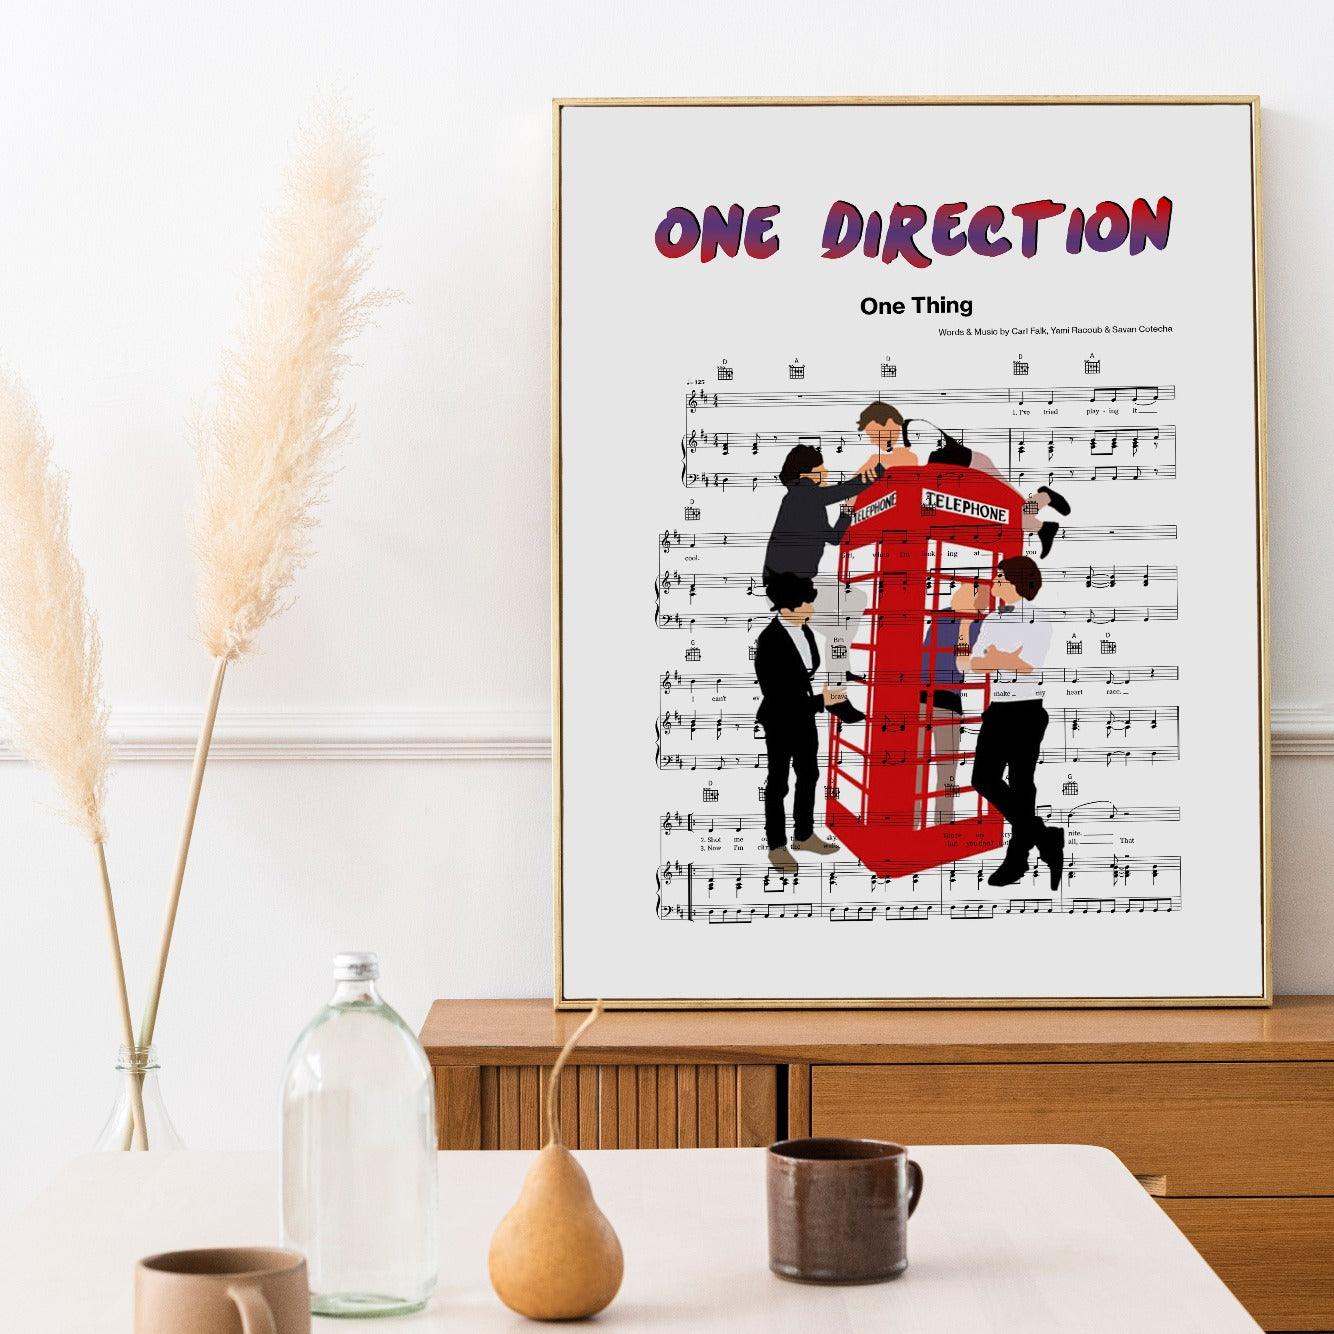 Get lost in the music with this high-quality print. Printed on thick, durable paper, this poster is perfect for your bedroom or dorm room. It's also a great gift for any Directioner. With beautiful lyrics from One Direction's song "One Thing," this print is a must-have for any fan of the band.